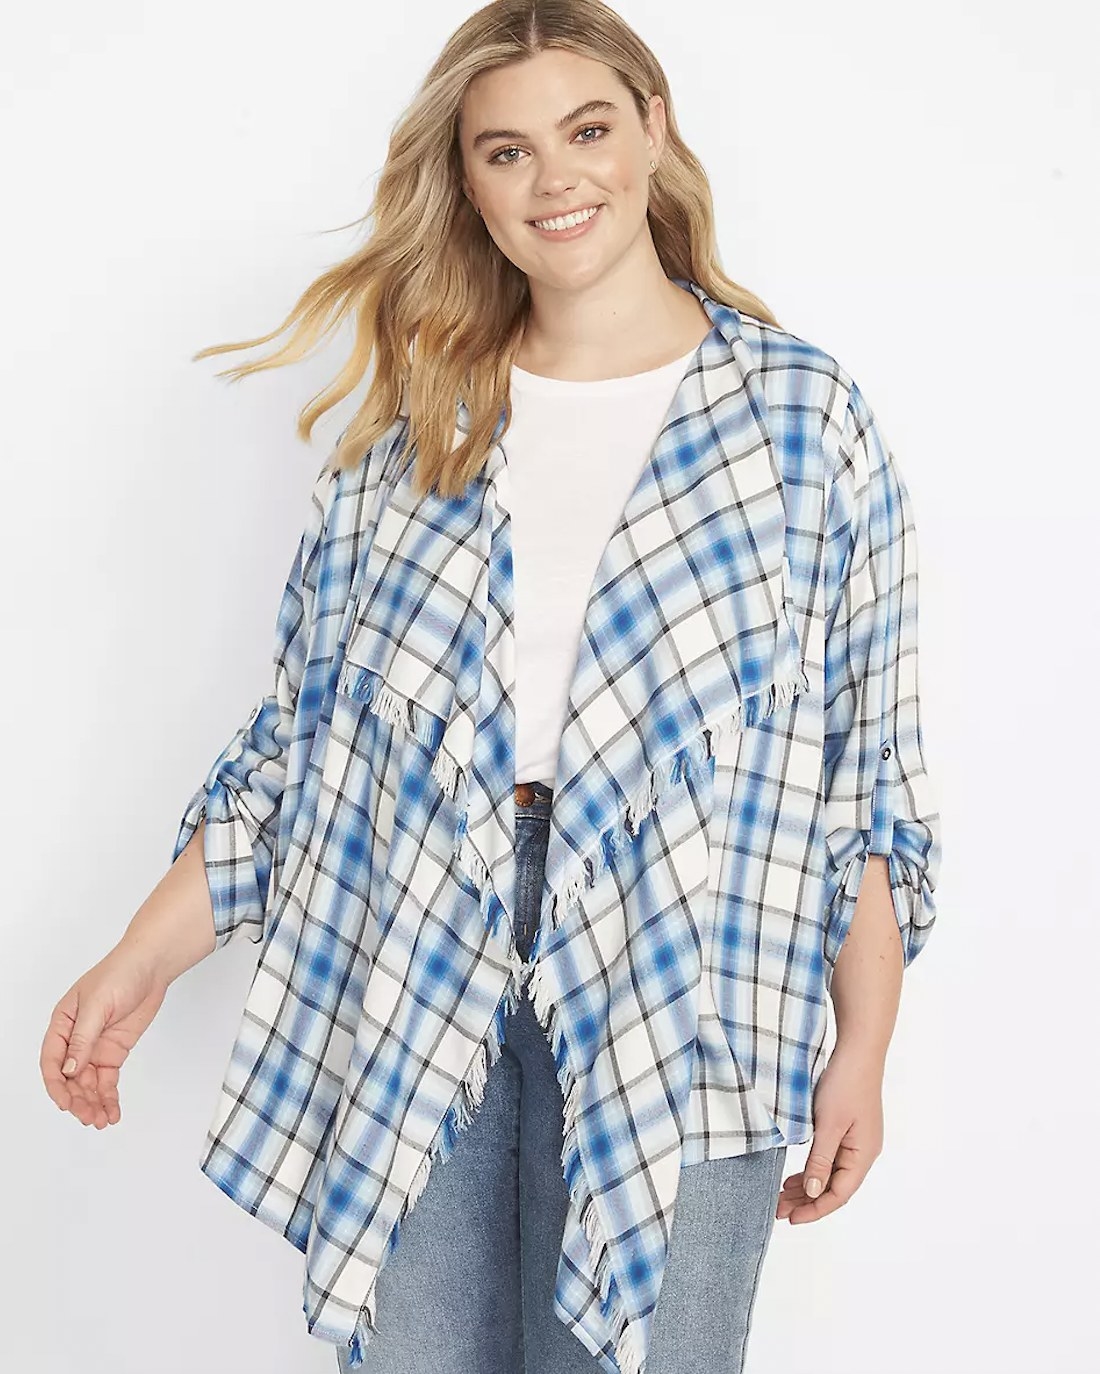 A person wearing a blue and white plaid shawl